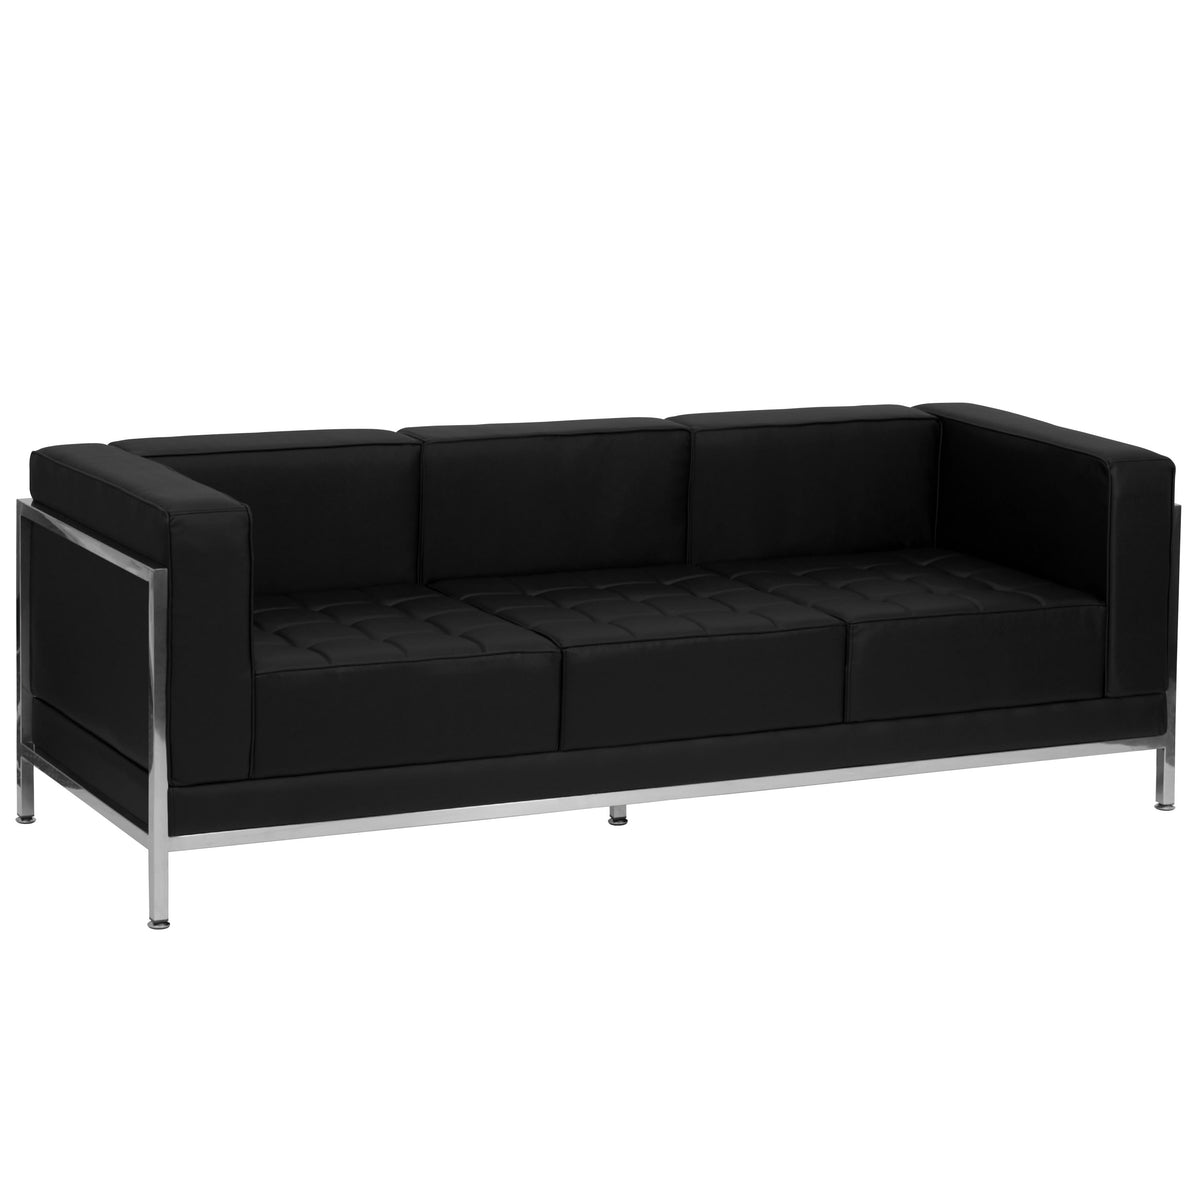 Black |#| 10 Piece Black LeatherSoft Modular Sectional & Sofa Set - Stainless Steel Legs